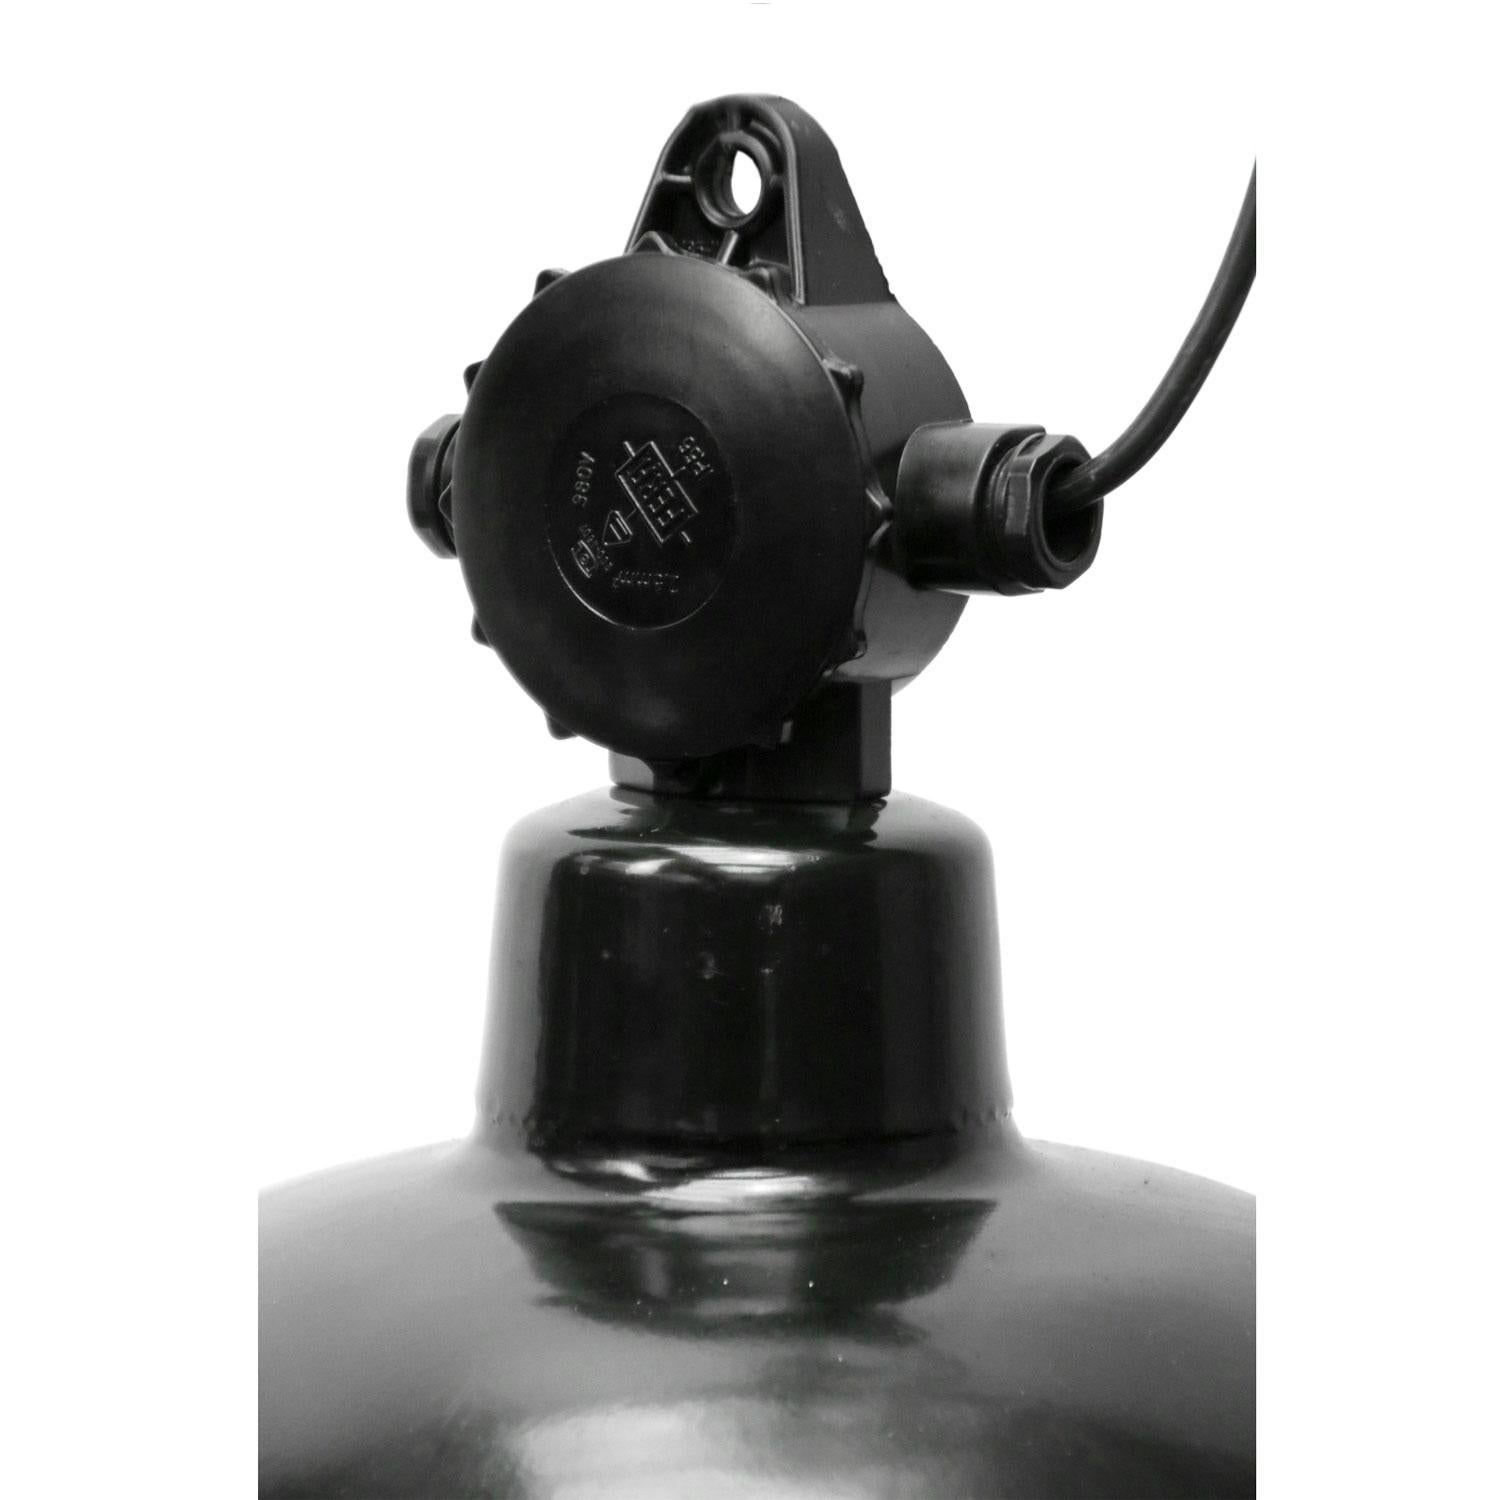 The German industrial classic!
Used in warehouses and factories in Germany.
Black enamel top with Bakelite top.

Weight: 1.57 kg / 3.5 lb

Priced per individual item. All lamps have been made suitable by international standards for